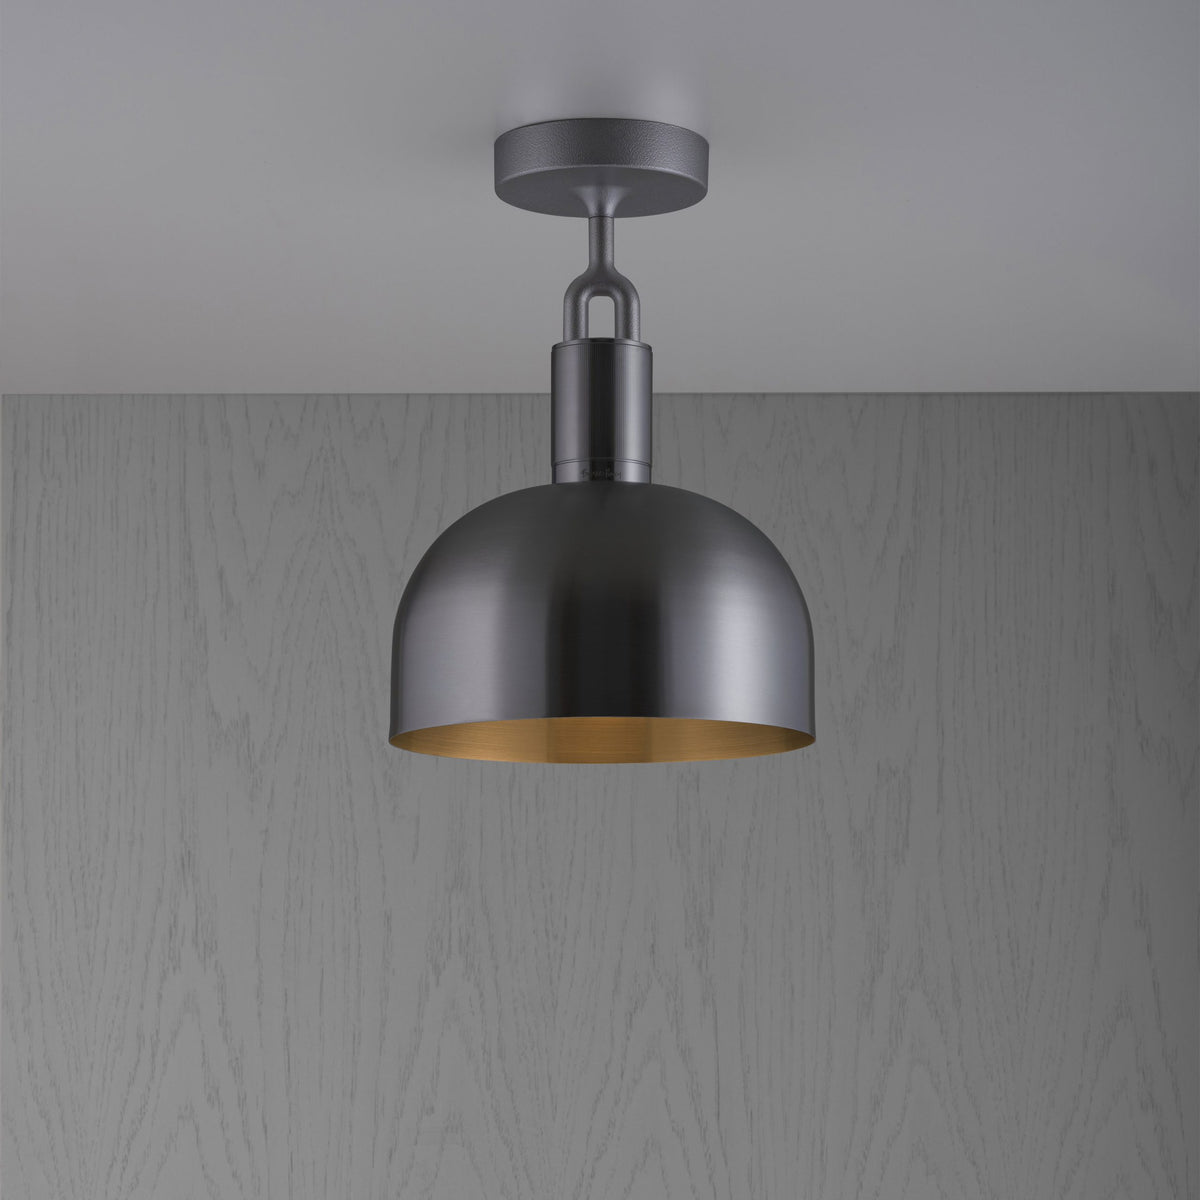 Buster + Punch - NFC-863223 - Forked Ceiling - Shade - Forked - Gun Metal